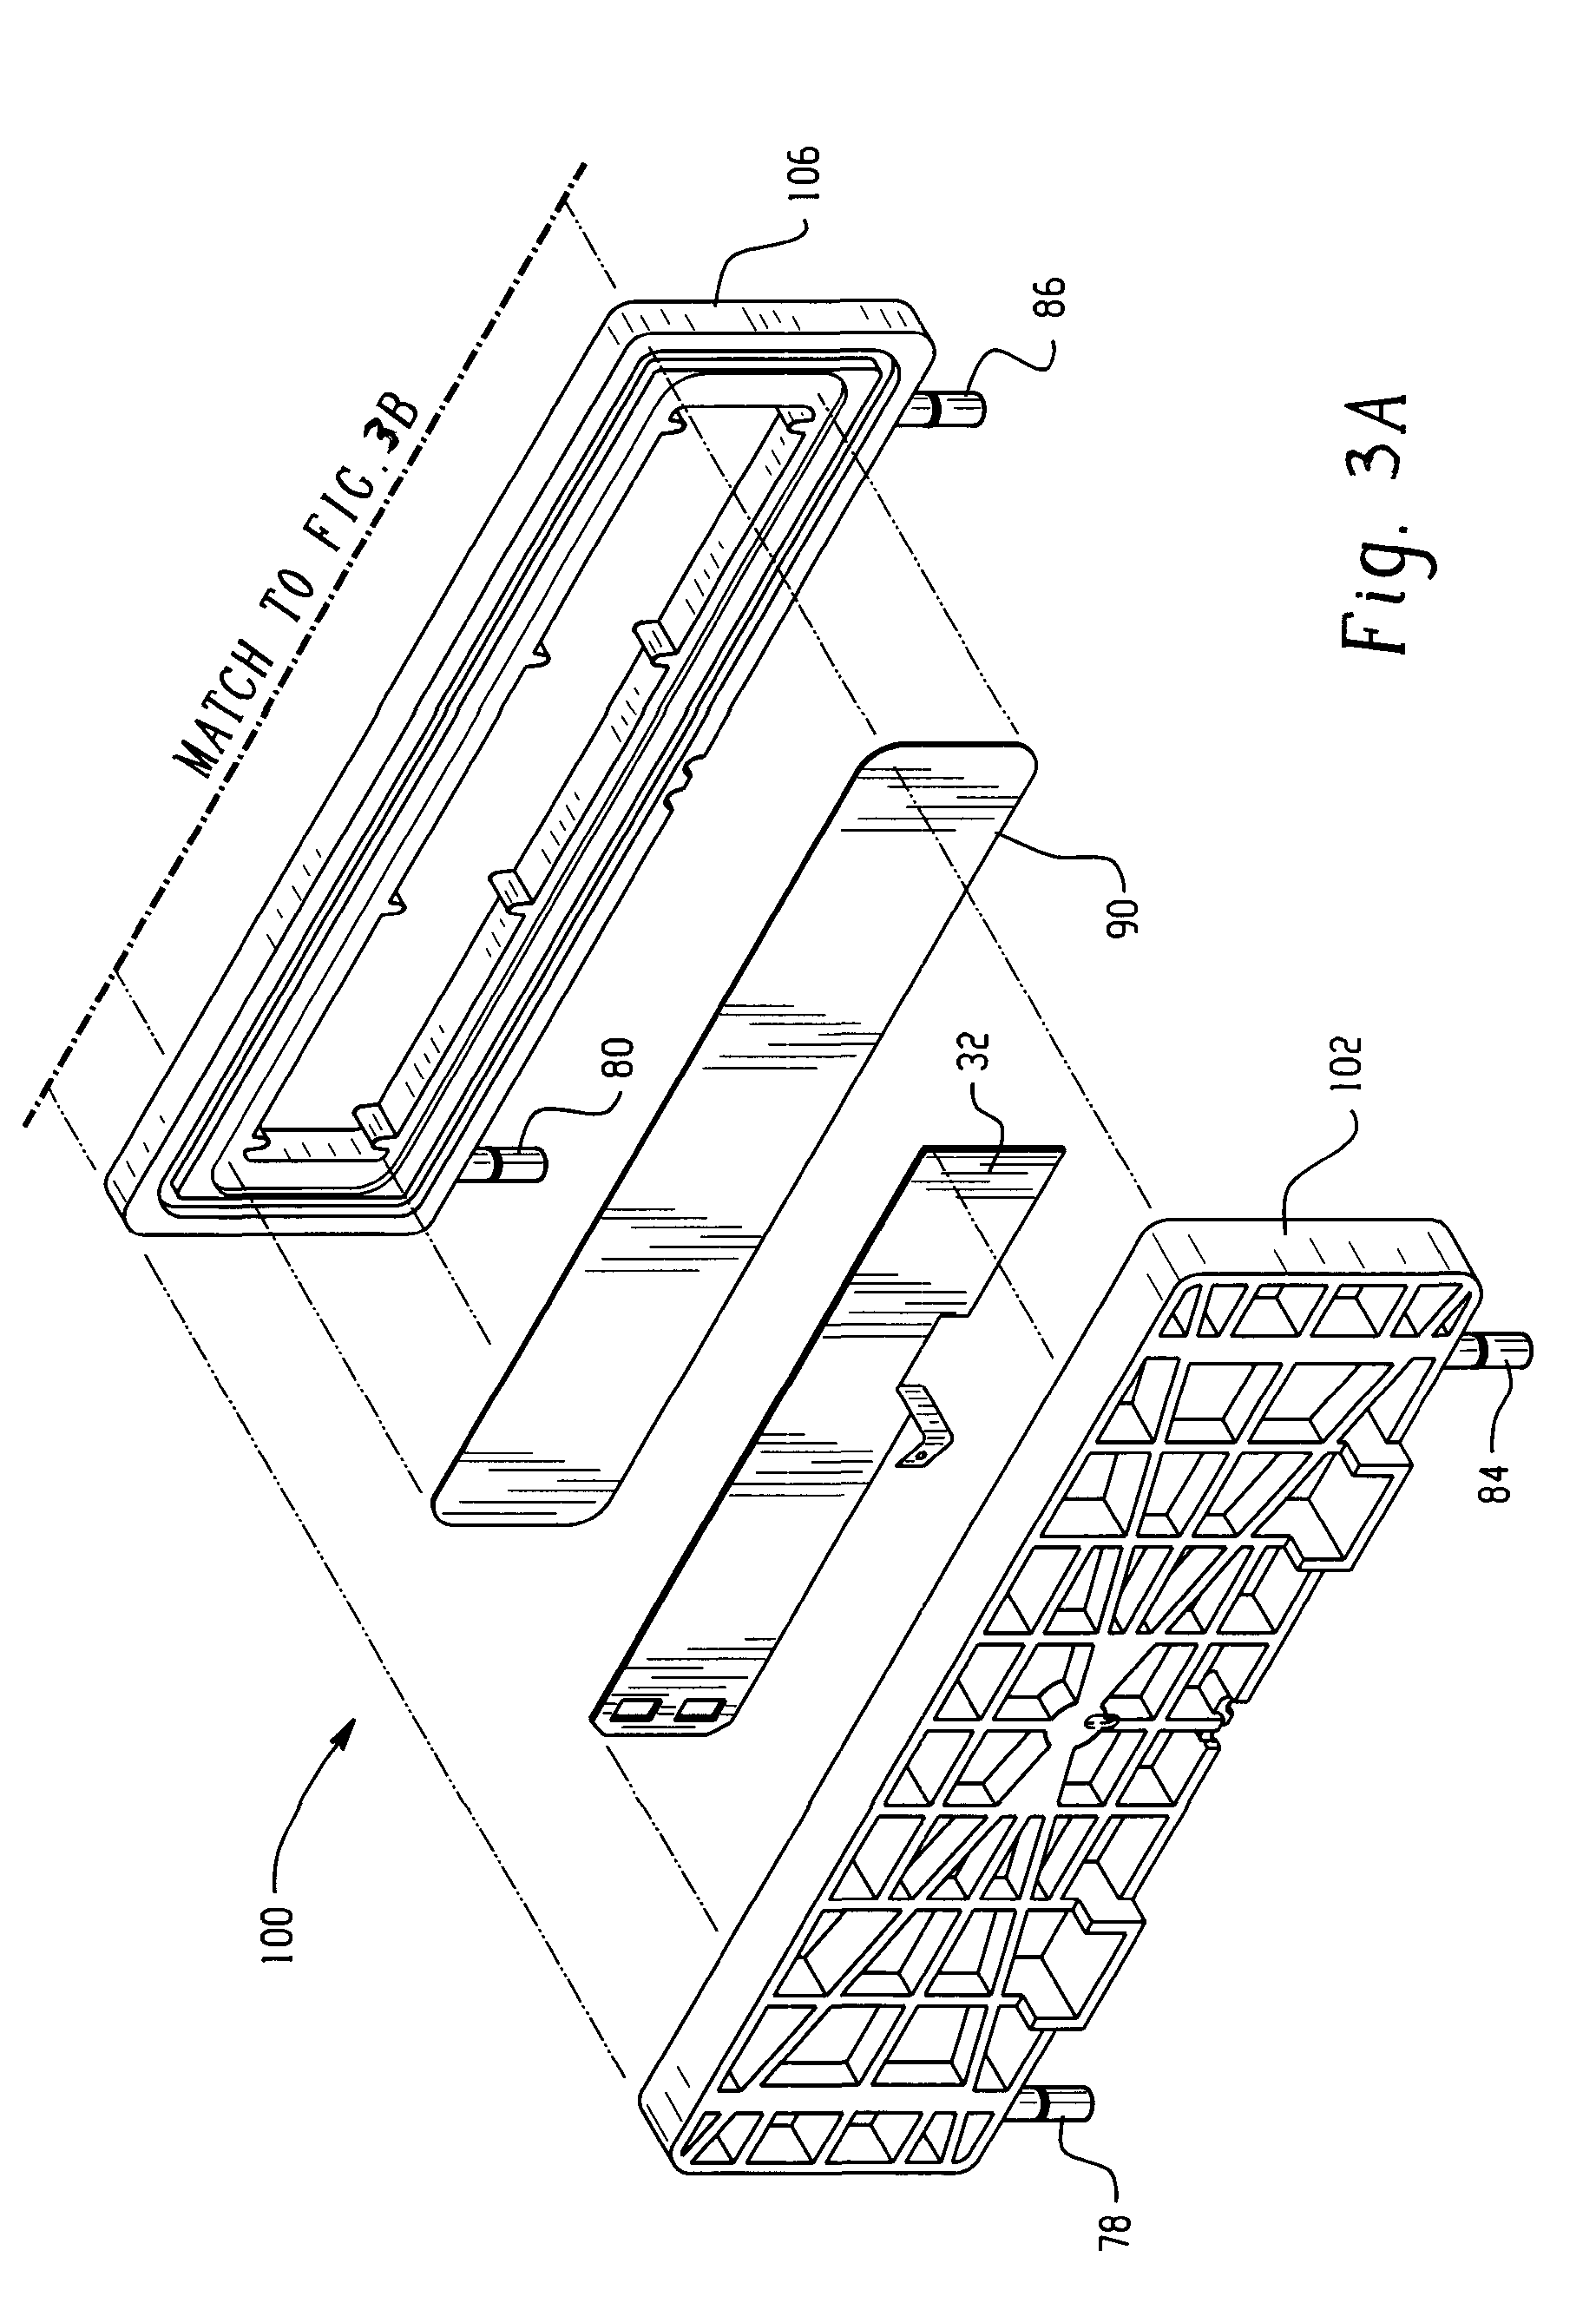 Electrolytic process for generating chlorine dioxide